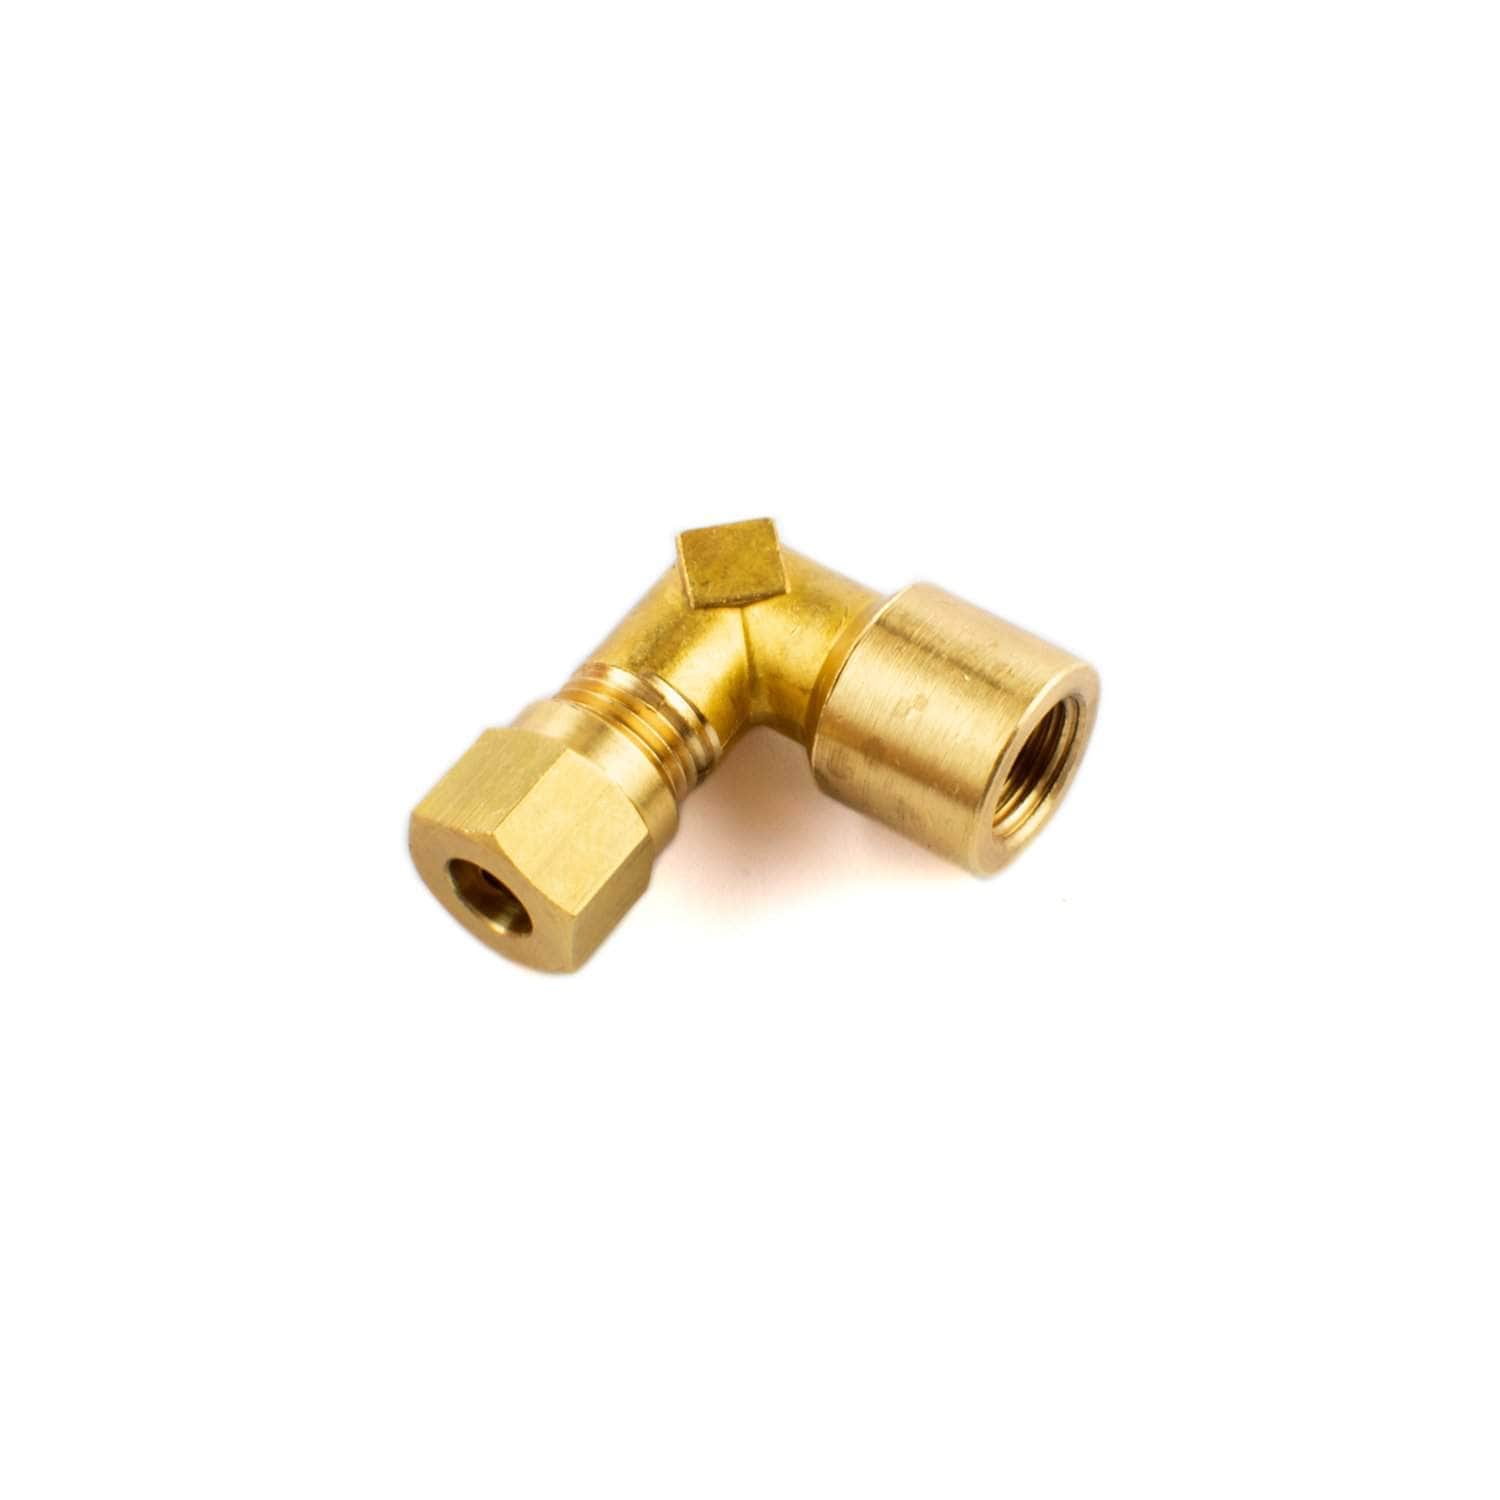 1/8" BSPT female x 6mm 90° compression elbow for use with Shallow Well oil Aga range cookers